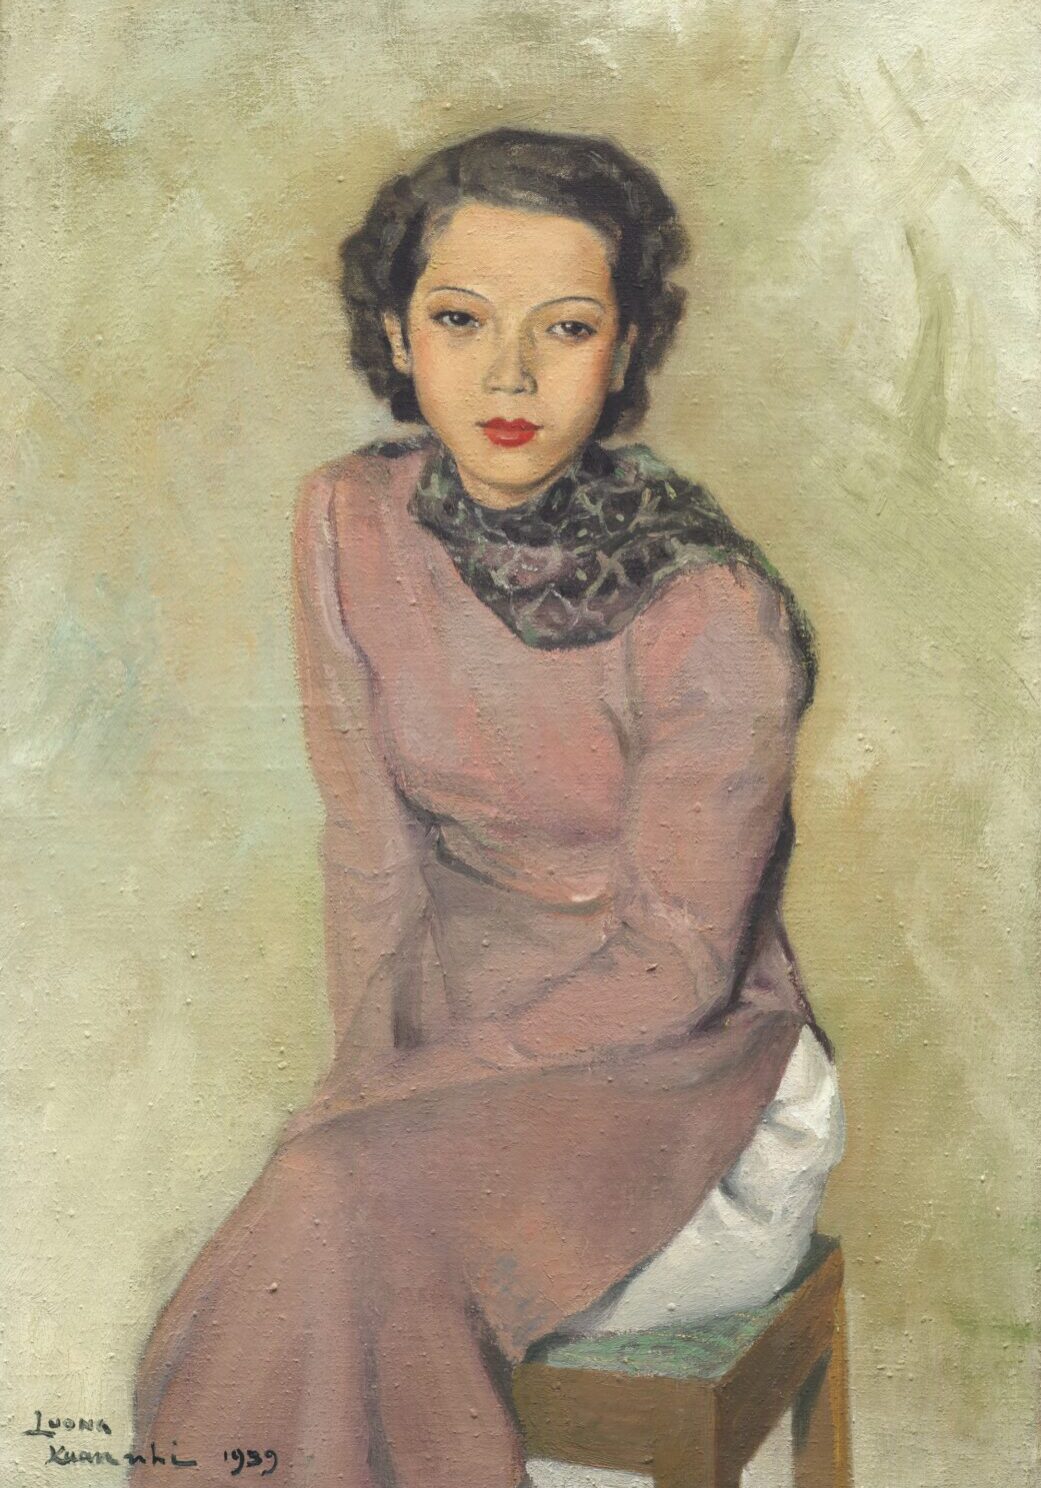 Luong Xuan Nhi (1914-2006), Portrait of a Lady, 1939, oil on canvas, 73.5 x 50 cm. (28 7⁄8 x 19 5⁄8 in.). Sold for HKD 2,125,000 at Christie's Hong Kong, 2 December 2021